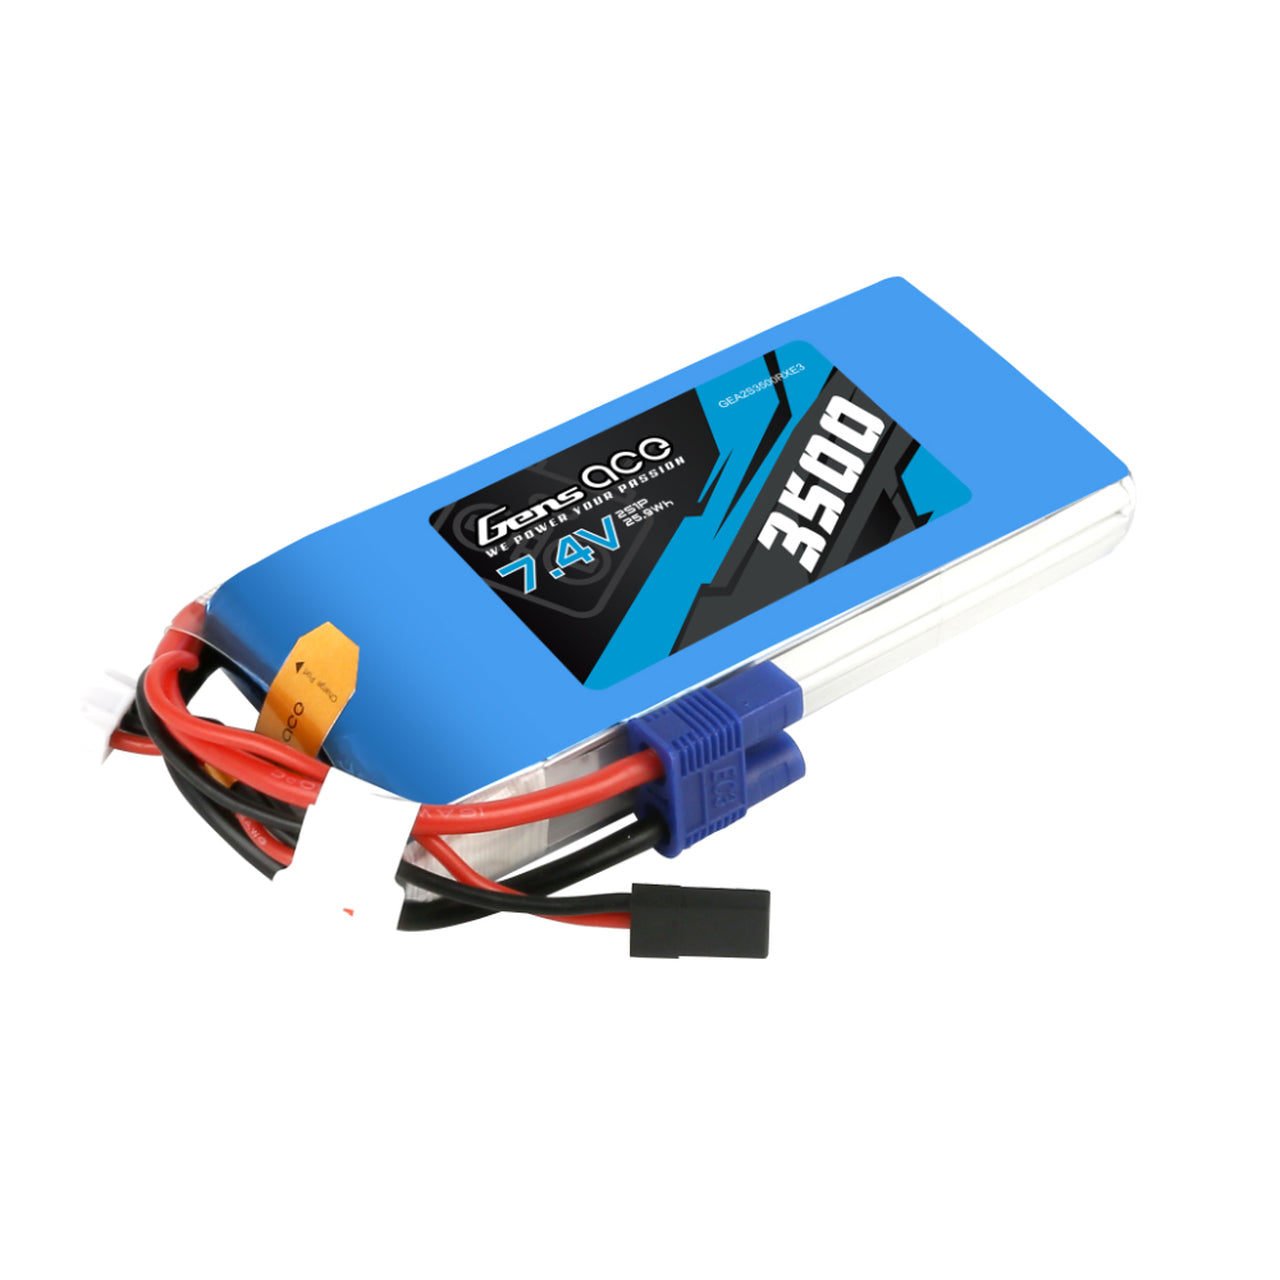 Gens Ace 3500mAh 7.4V 2S1P RX Lipo Battery Pack With JR And EC3 Plug